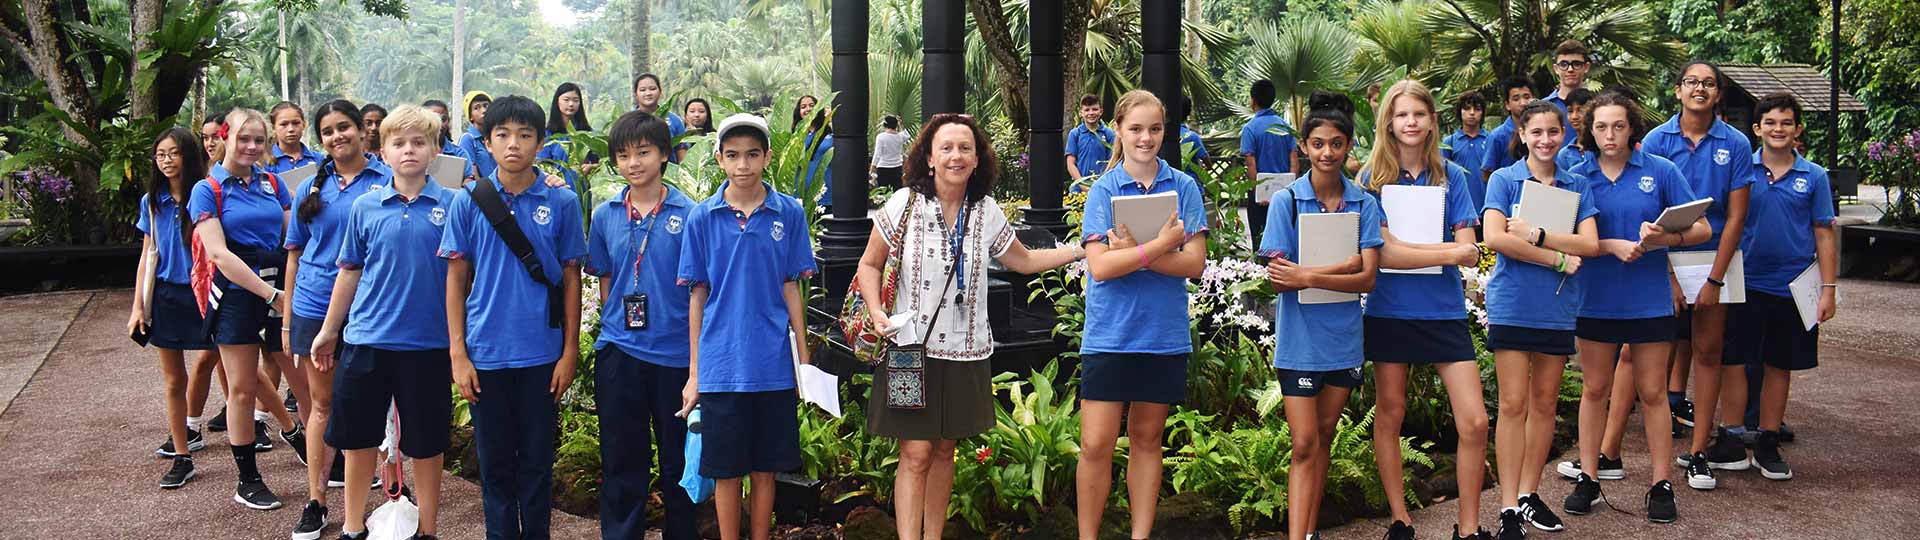 Chatsworth International School provides a nurturing and caring learning environment for students to learn and thrive